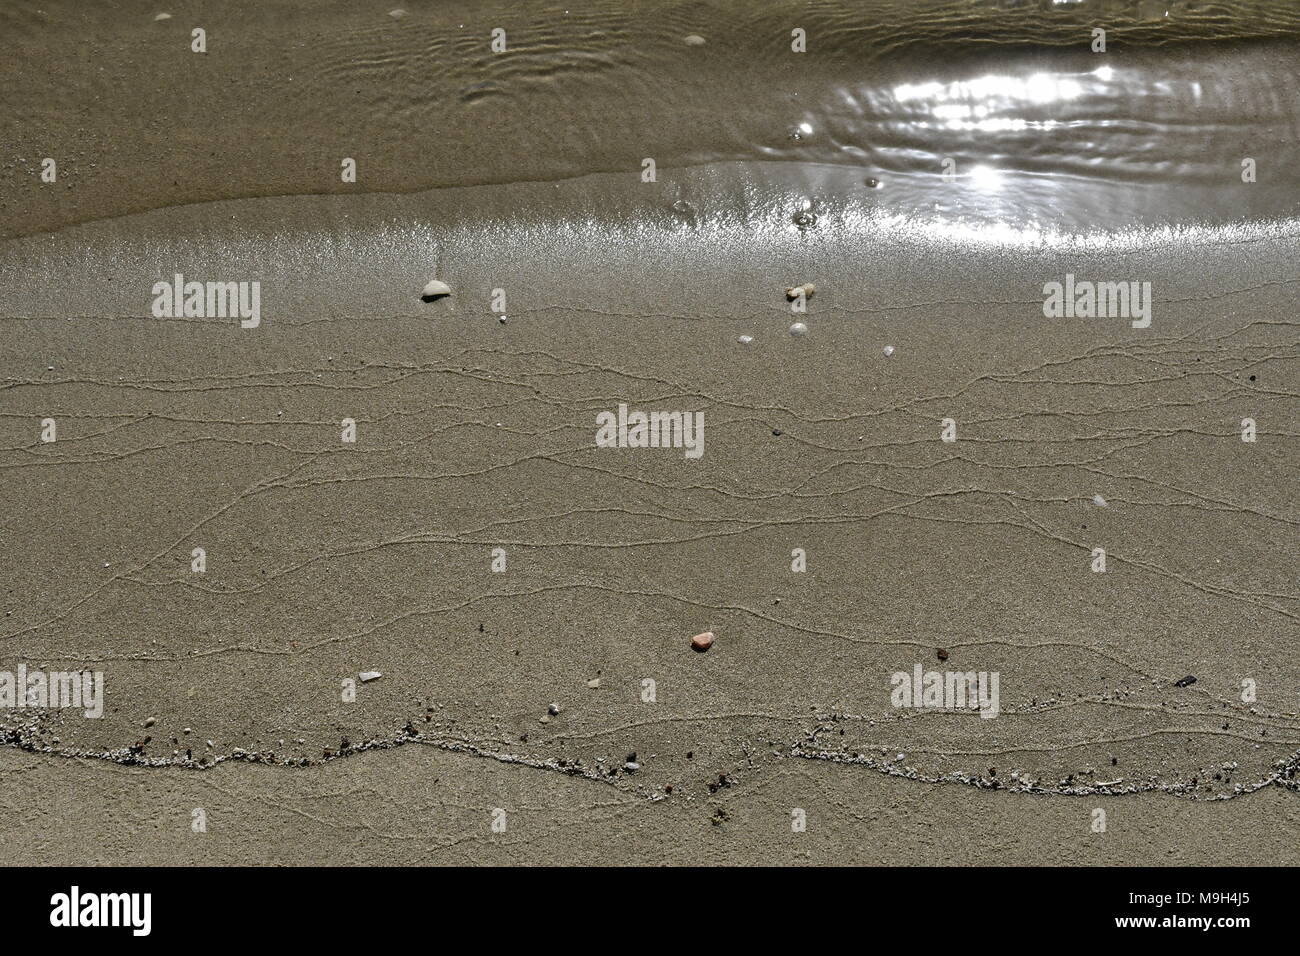 Sand and sea waves on a sandy beach in Dammam Stock Photo